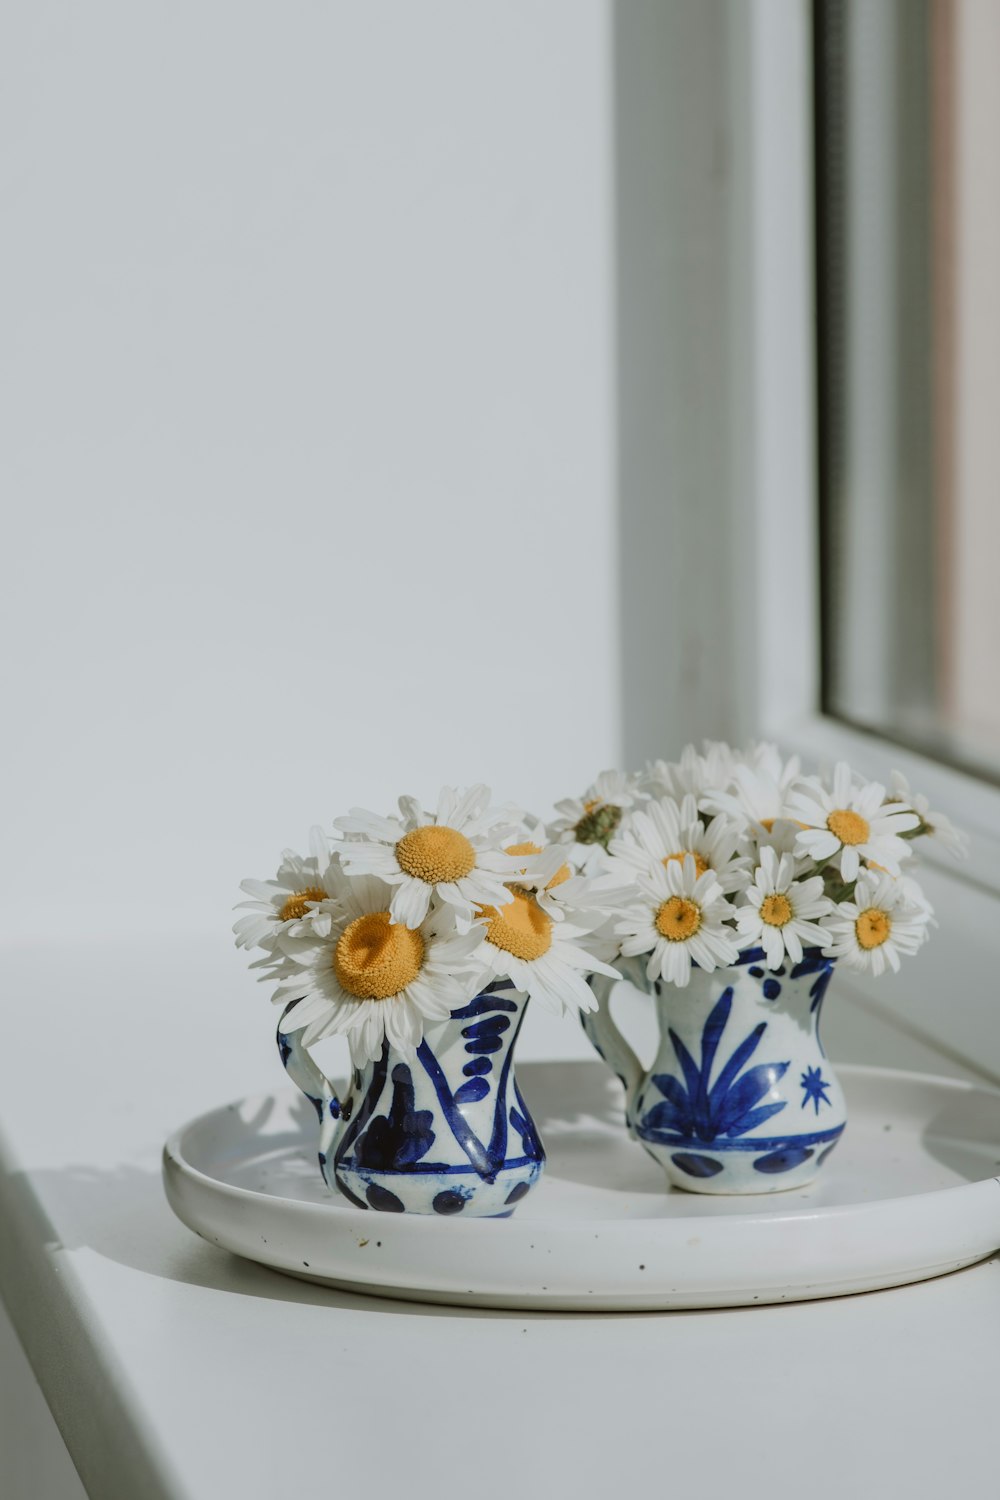 two blue and white vases with daisies on a plate